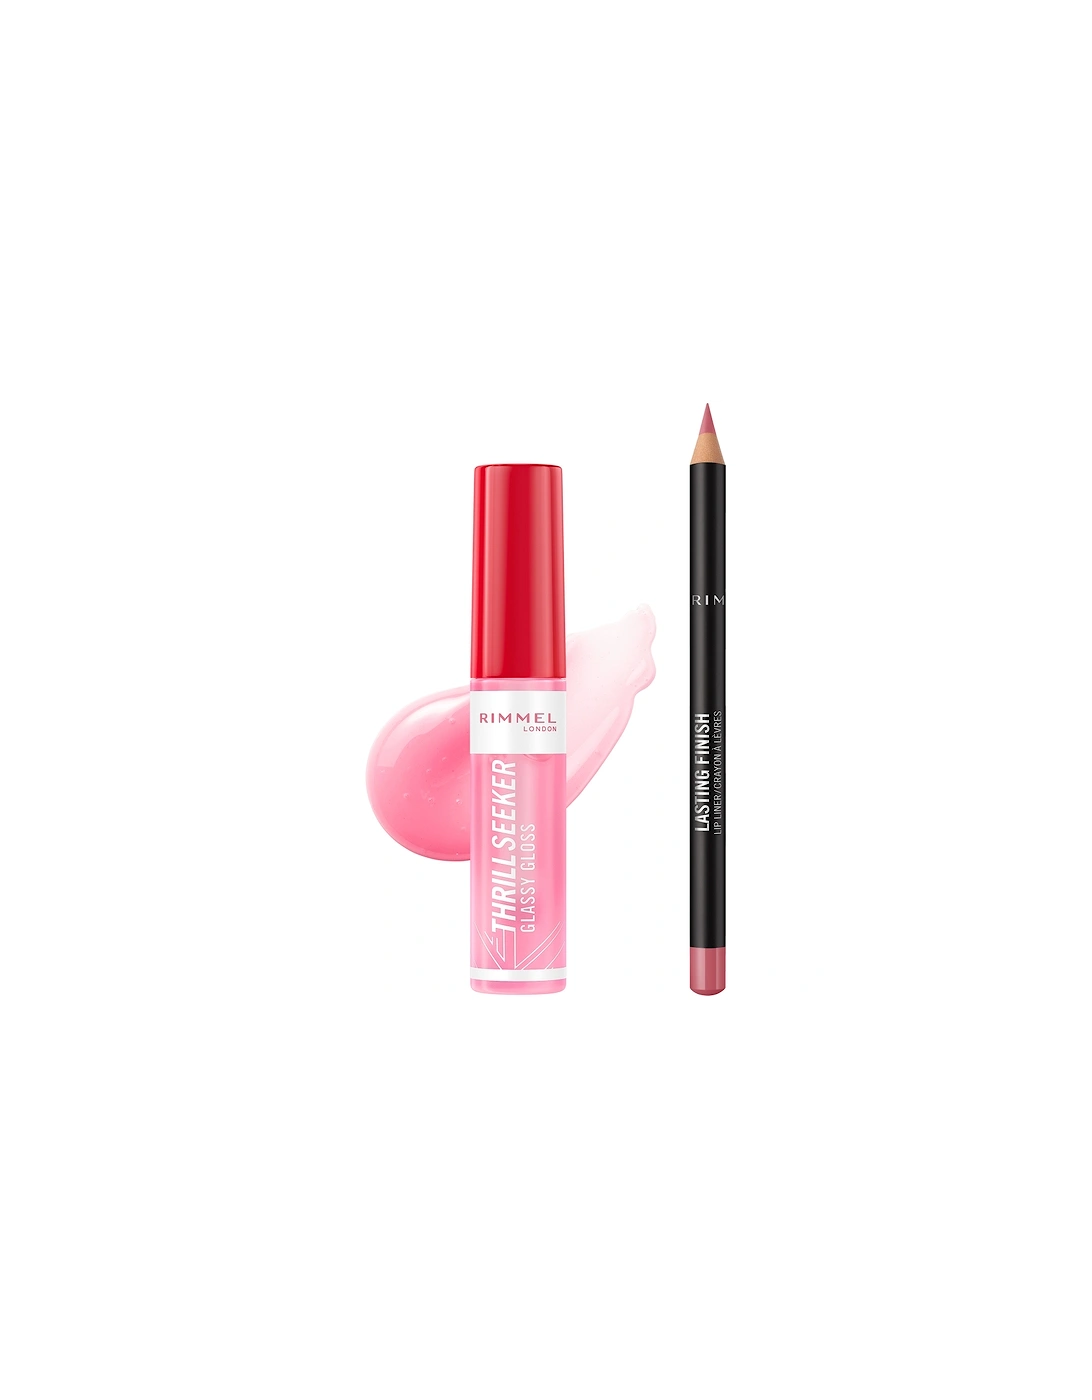 Thrill Seeker Glassy Gloss and Lasting Finish Lip Liner - 150 Pink Candy, 2 of 1